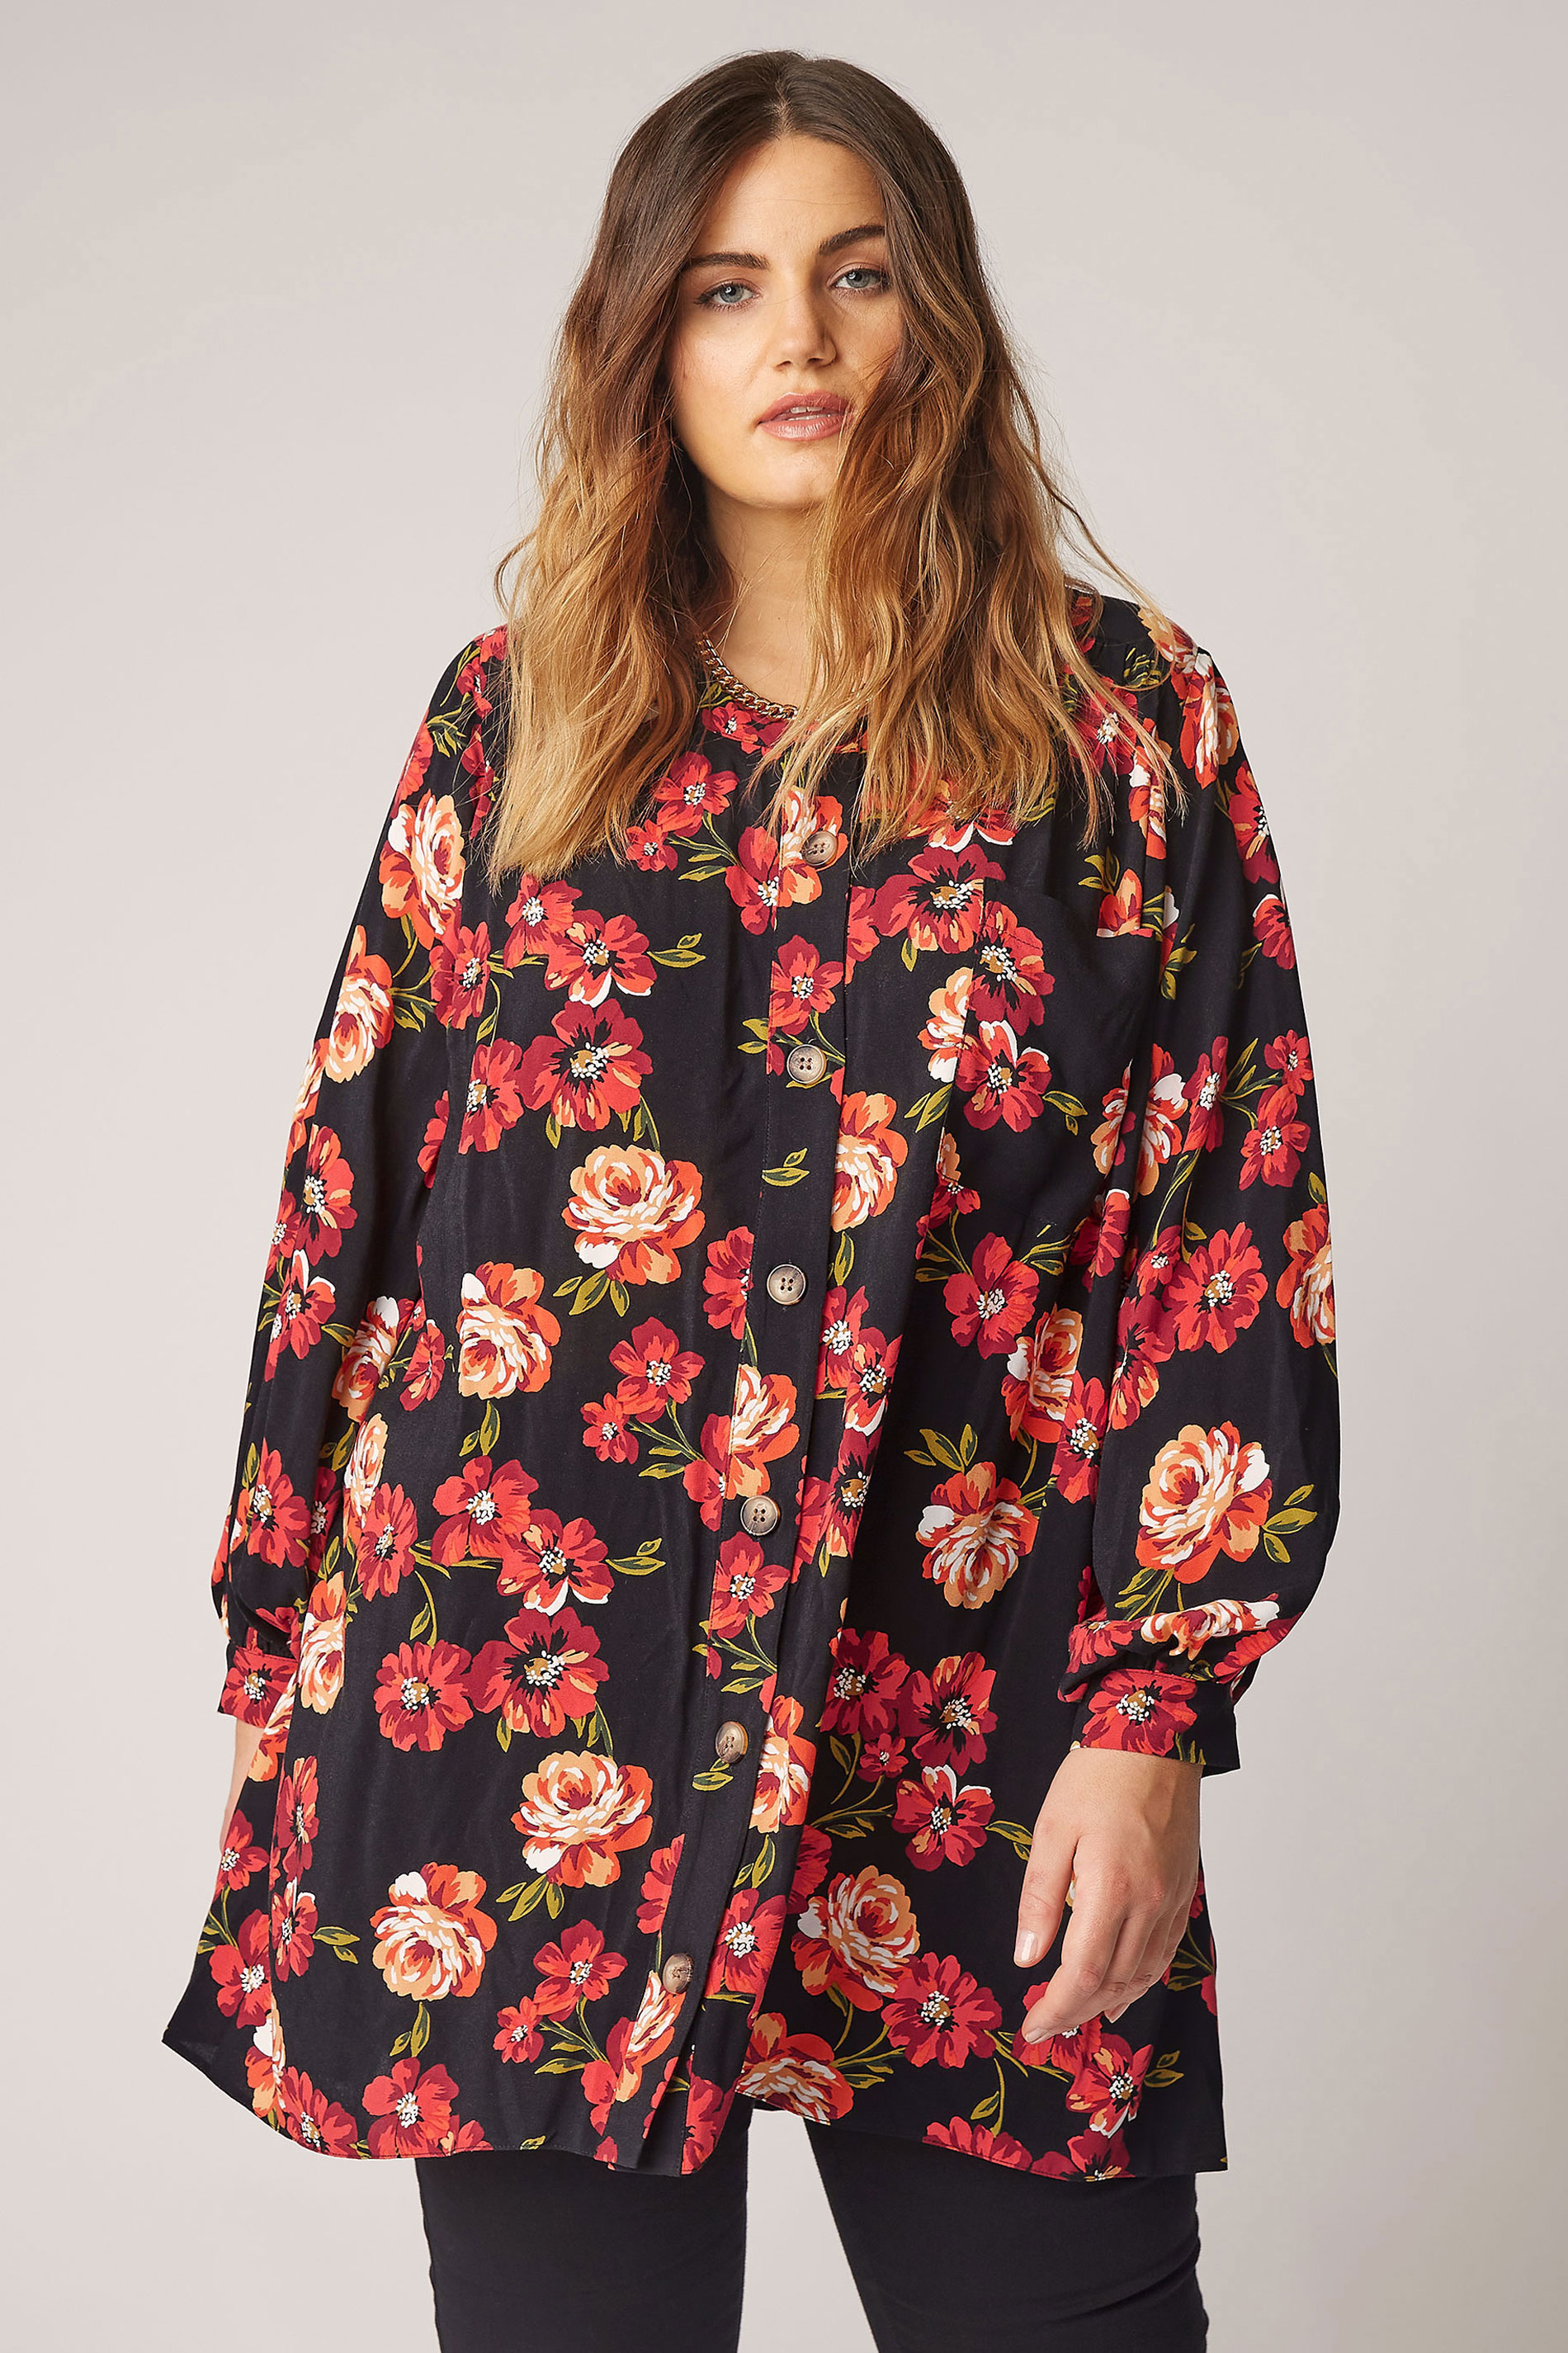 THE LIMITED EDIT Black Floral Smock Tiered Shirt_A.jpg